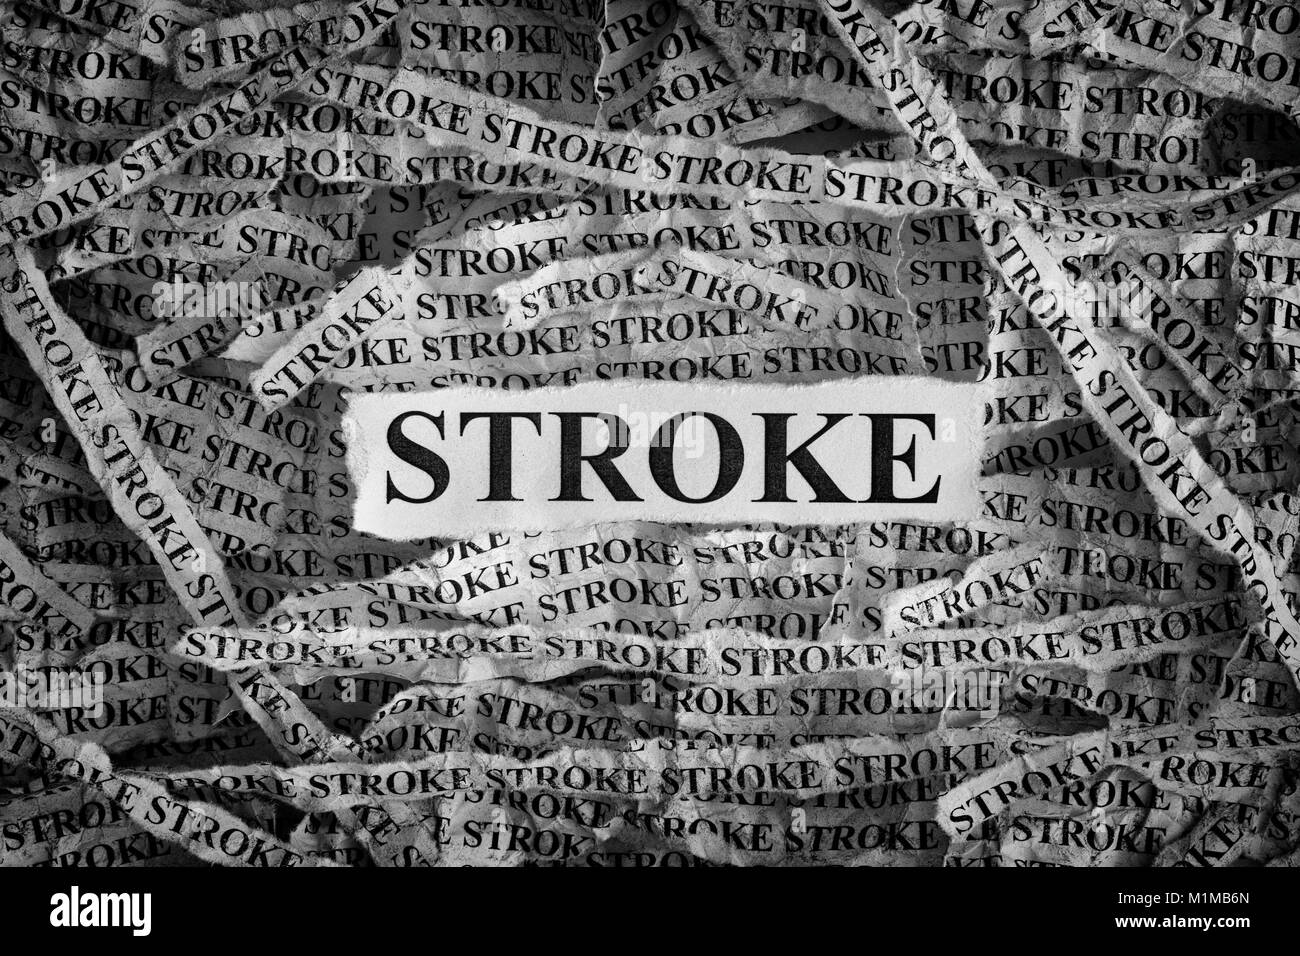 Stroke. Torn pieces of paper with the word Stroke. Concept Image. Black and White. Closeup. Stock Photo